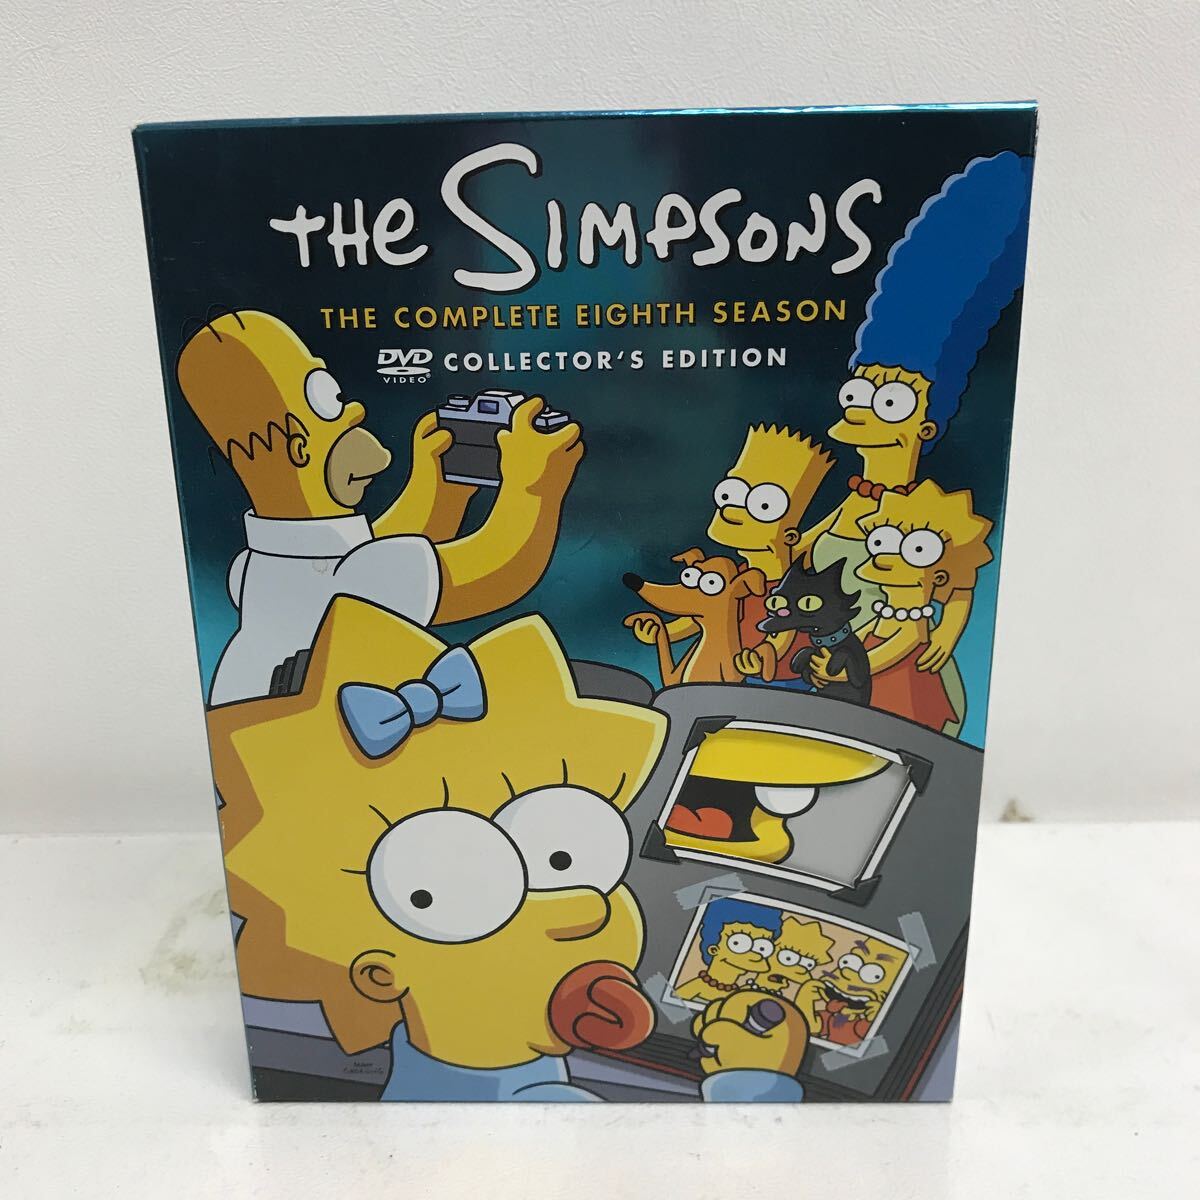 I0321A3 The * Simpson z season 8 THE SIMPSONS DVD collectors BOX 4 sheets set cell version THE COMPLETE EIGHTH SEASON abroad anime 